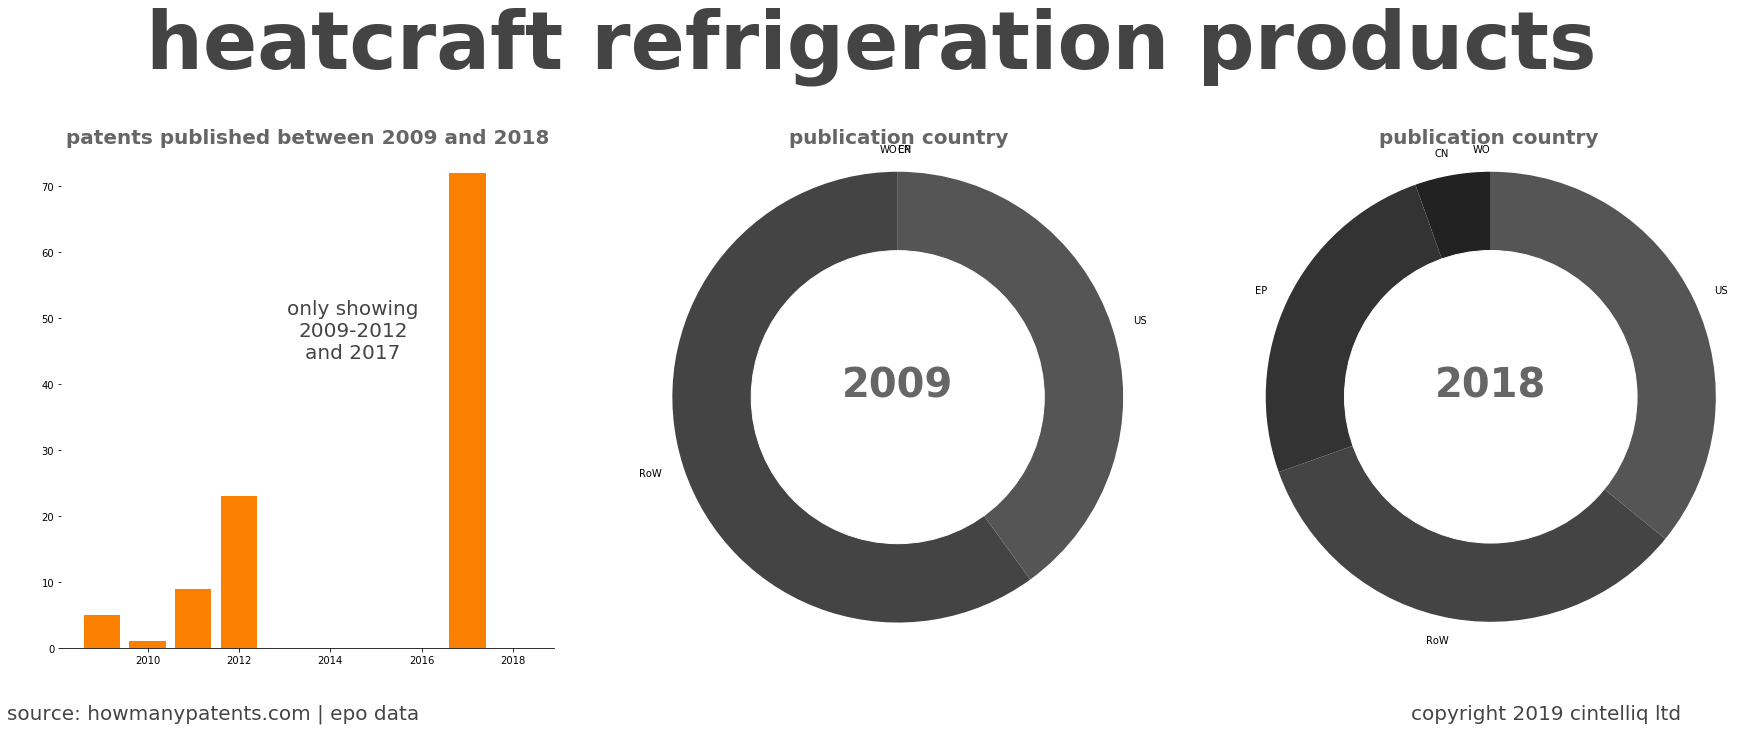 summary of patents for Heatcraft Refrigeration Products